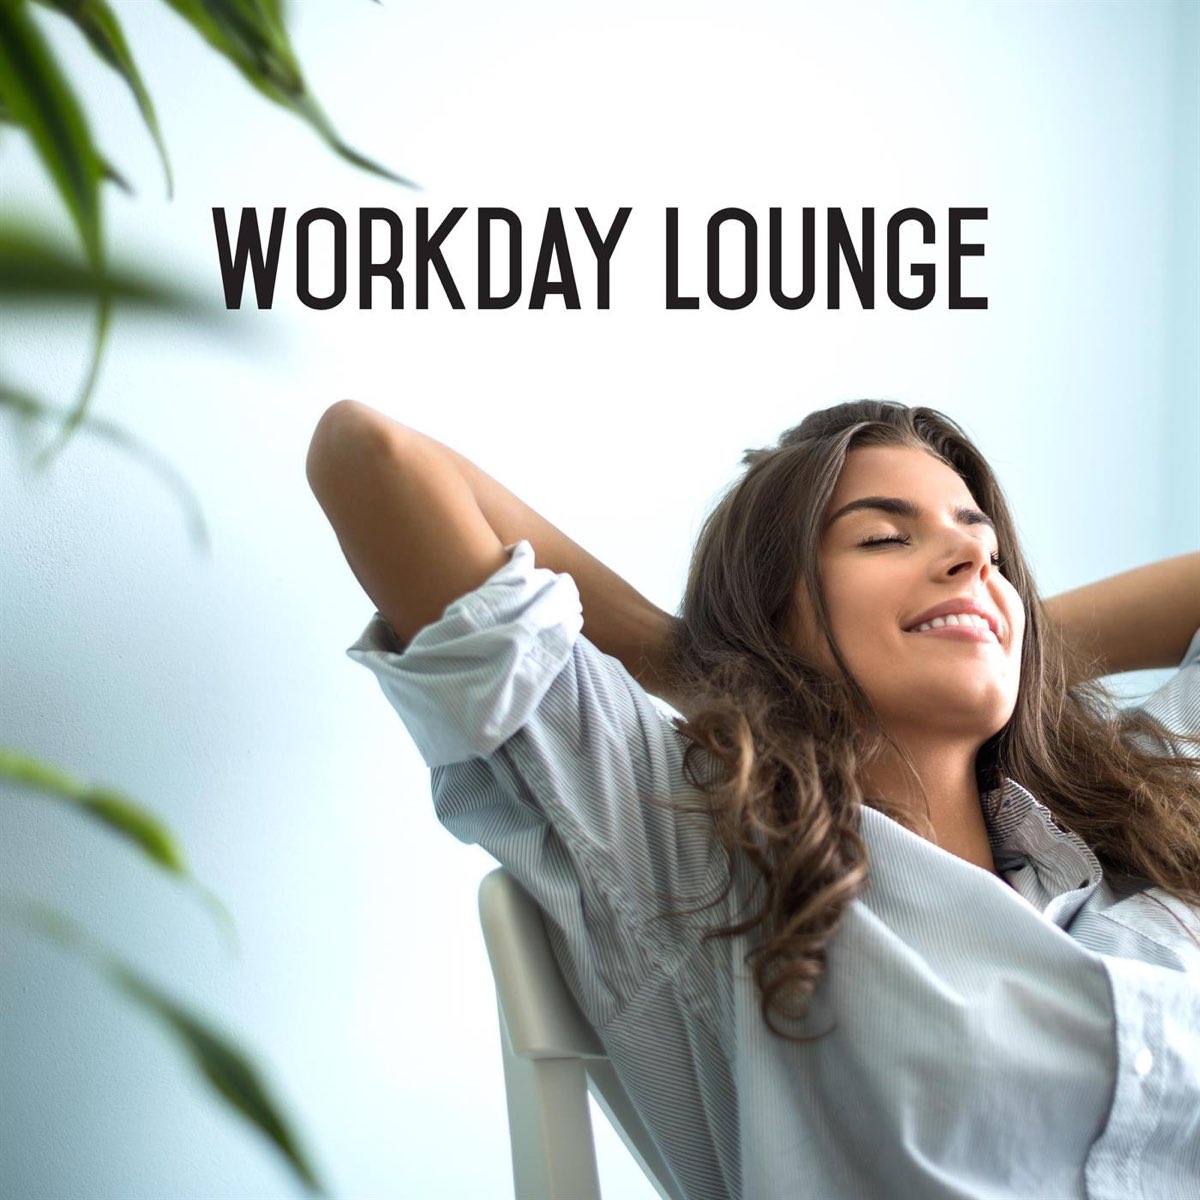 ‎Workday Lounge by Various Artists on Apple Music